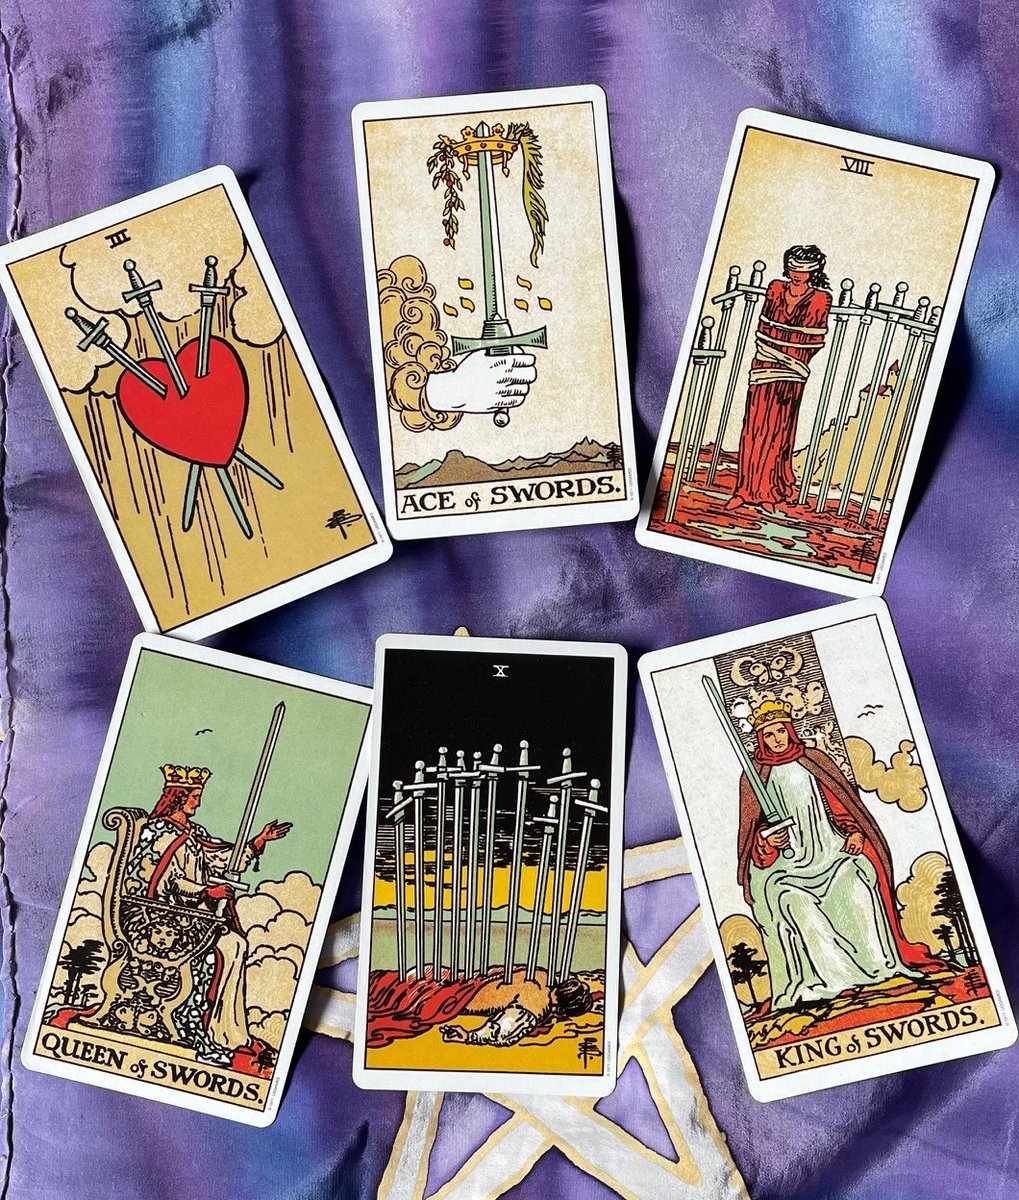 Continuing #PaganPathwaysUK's blogs on the #MinorArcana of the #tarot, this week we're looking at the Swords suite! Read the blog at paganpathways.uk/f/guide-to-the… and let us know how you feel about the Swords - do you like this suite or not?
#paganblog #tarotcards #pagan #witch #wicca